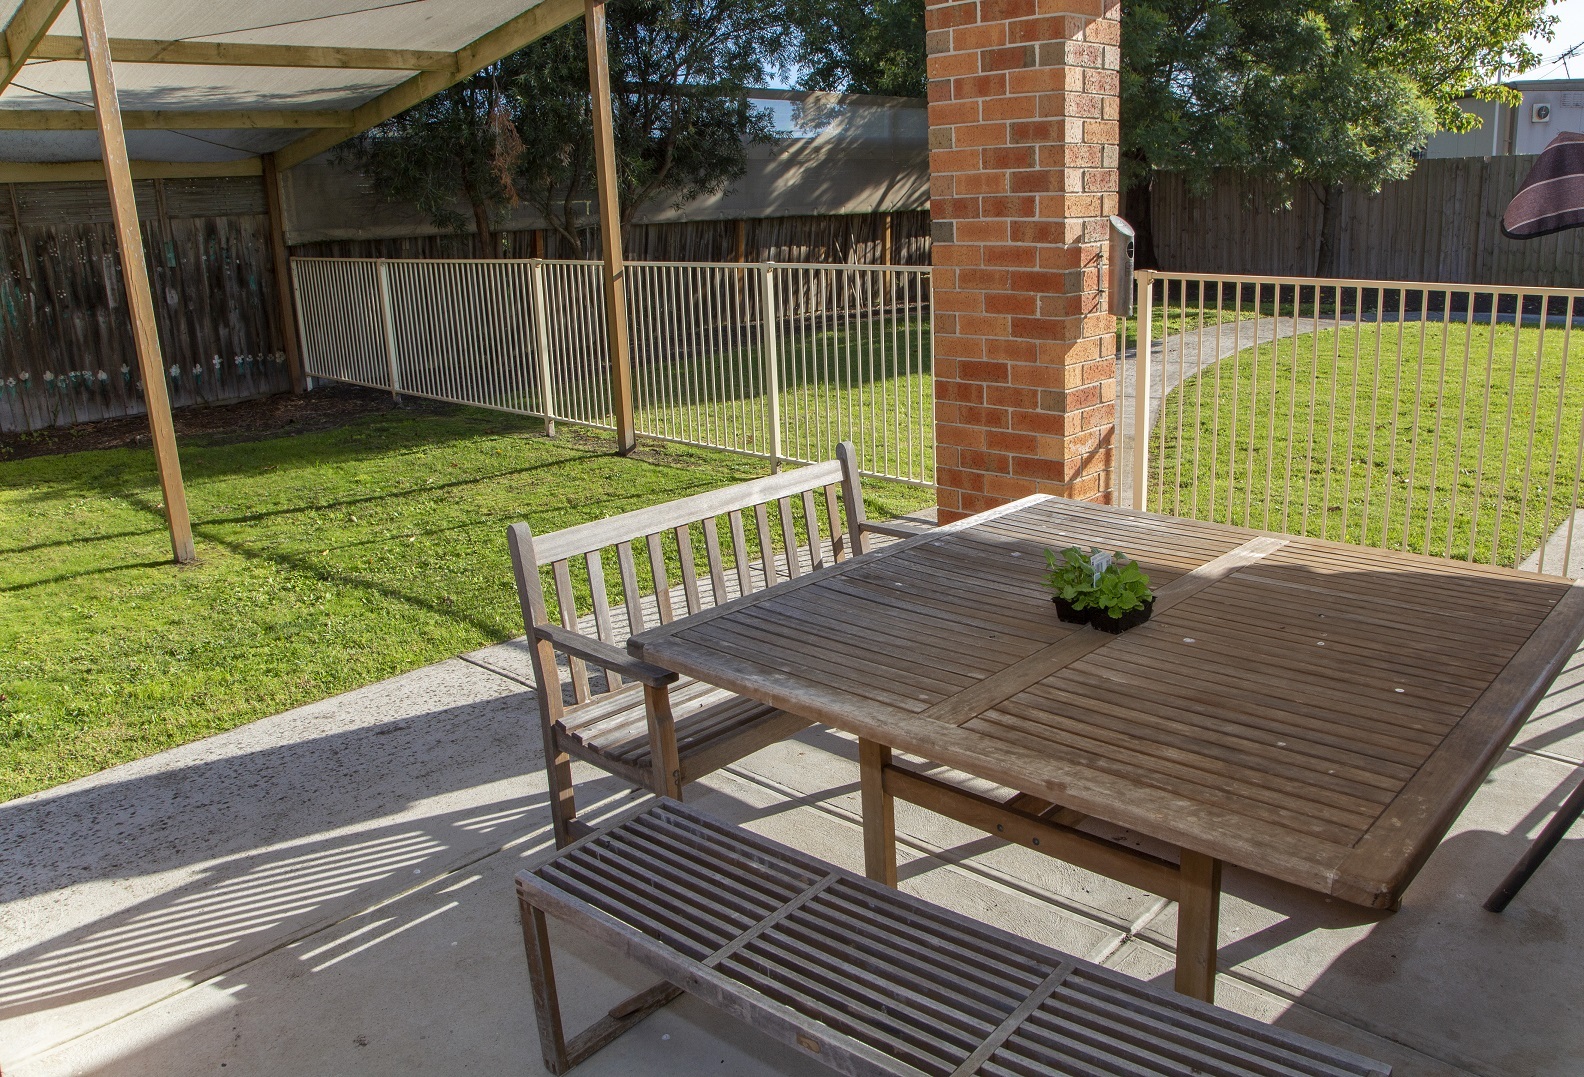 Outdoor area with table and chairs and pagola